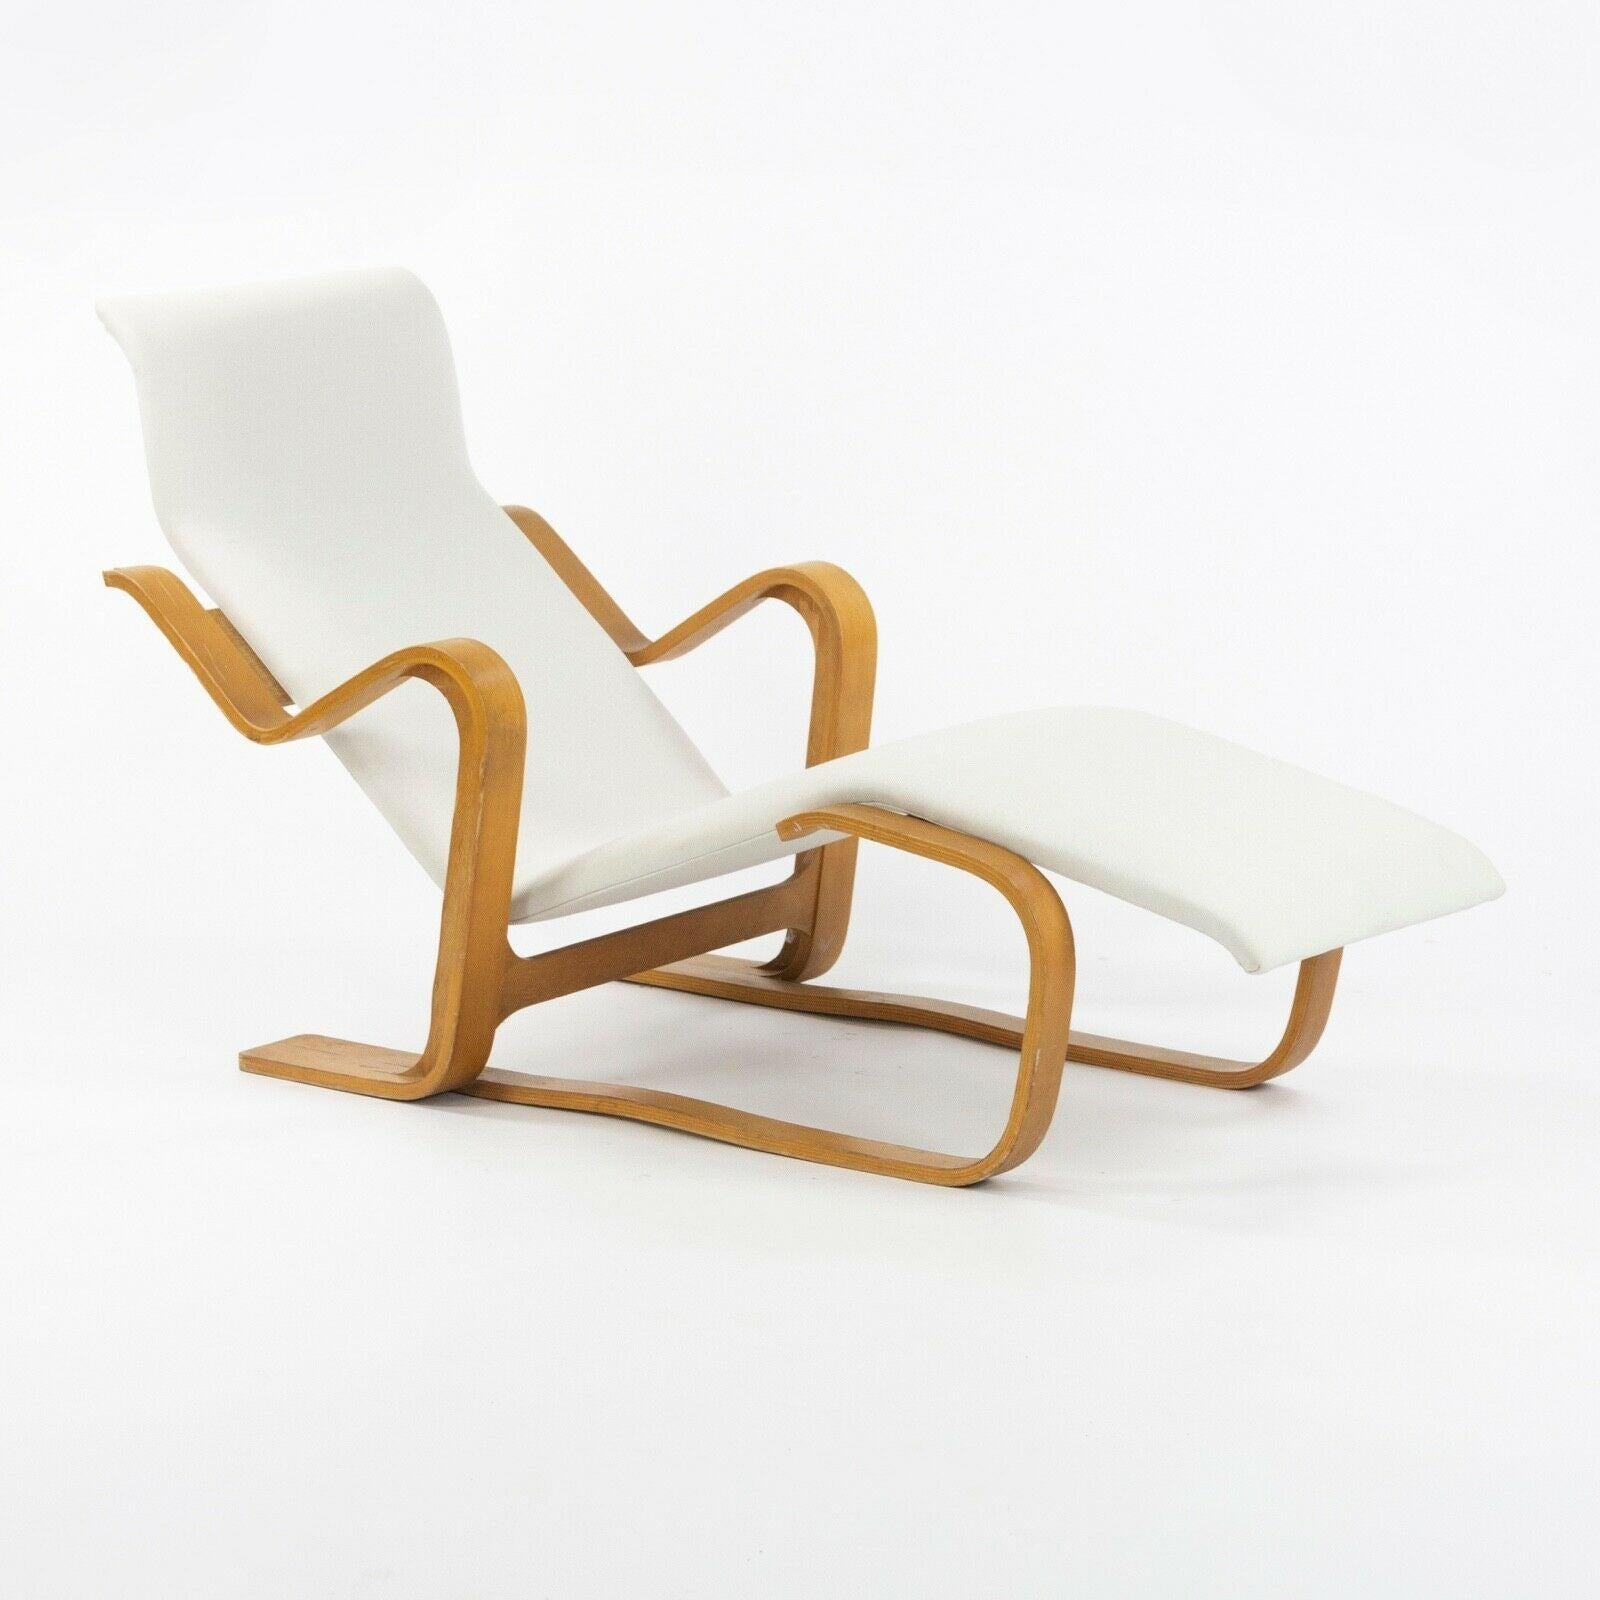 Modern 1960s Marcel Breuer for Knoll Isokon Chaise Lounge Chair New White Upholstery For Sale